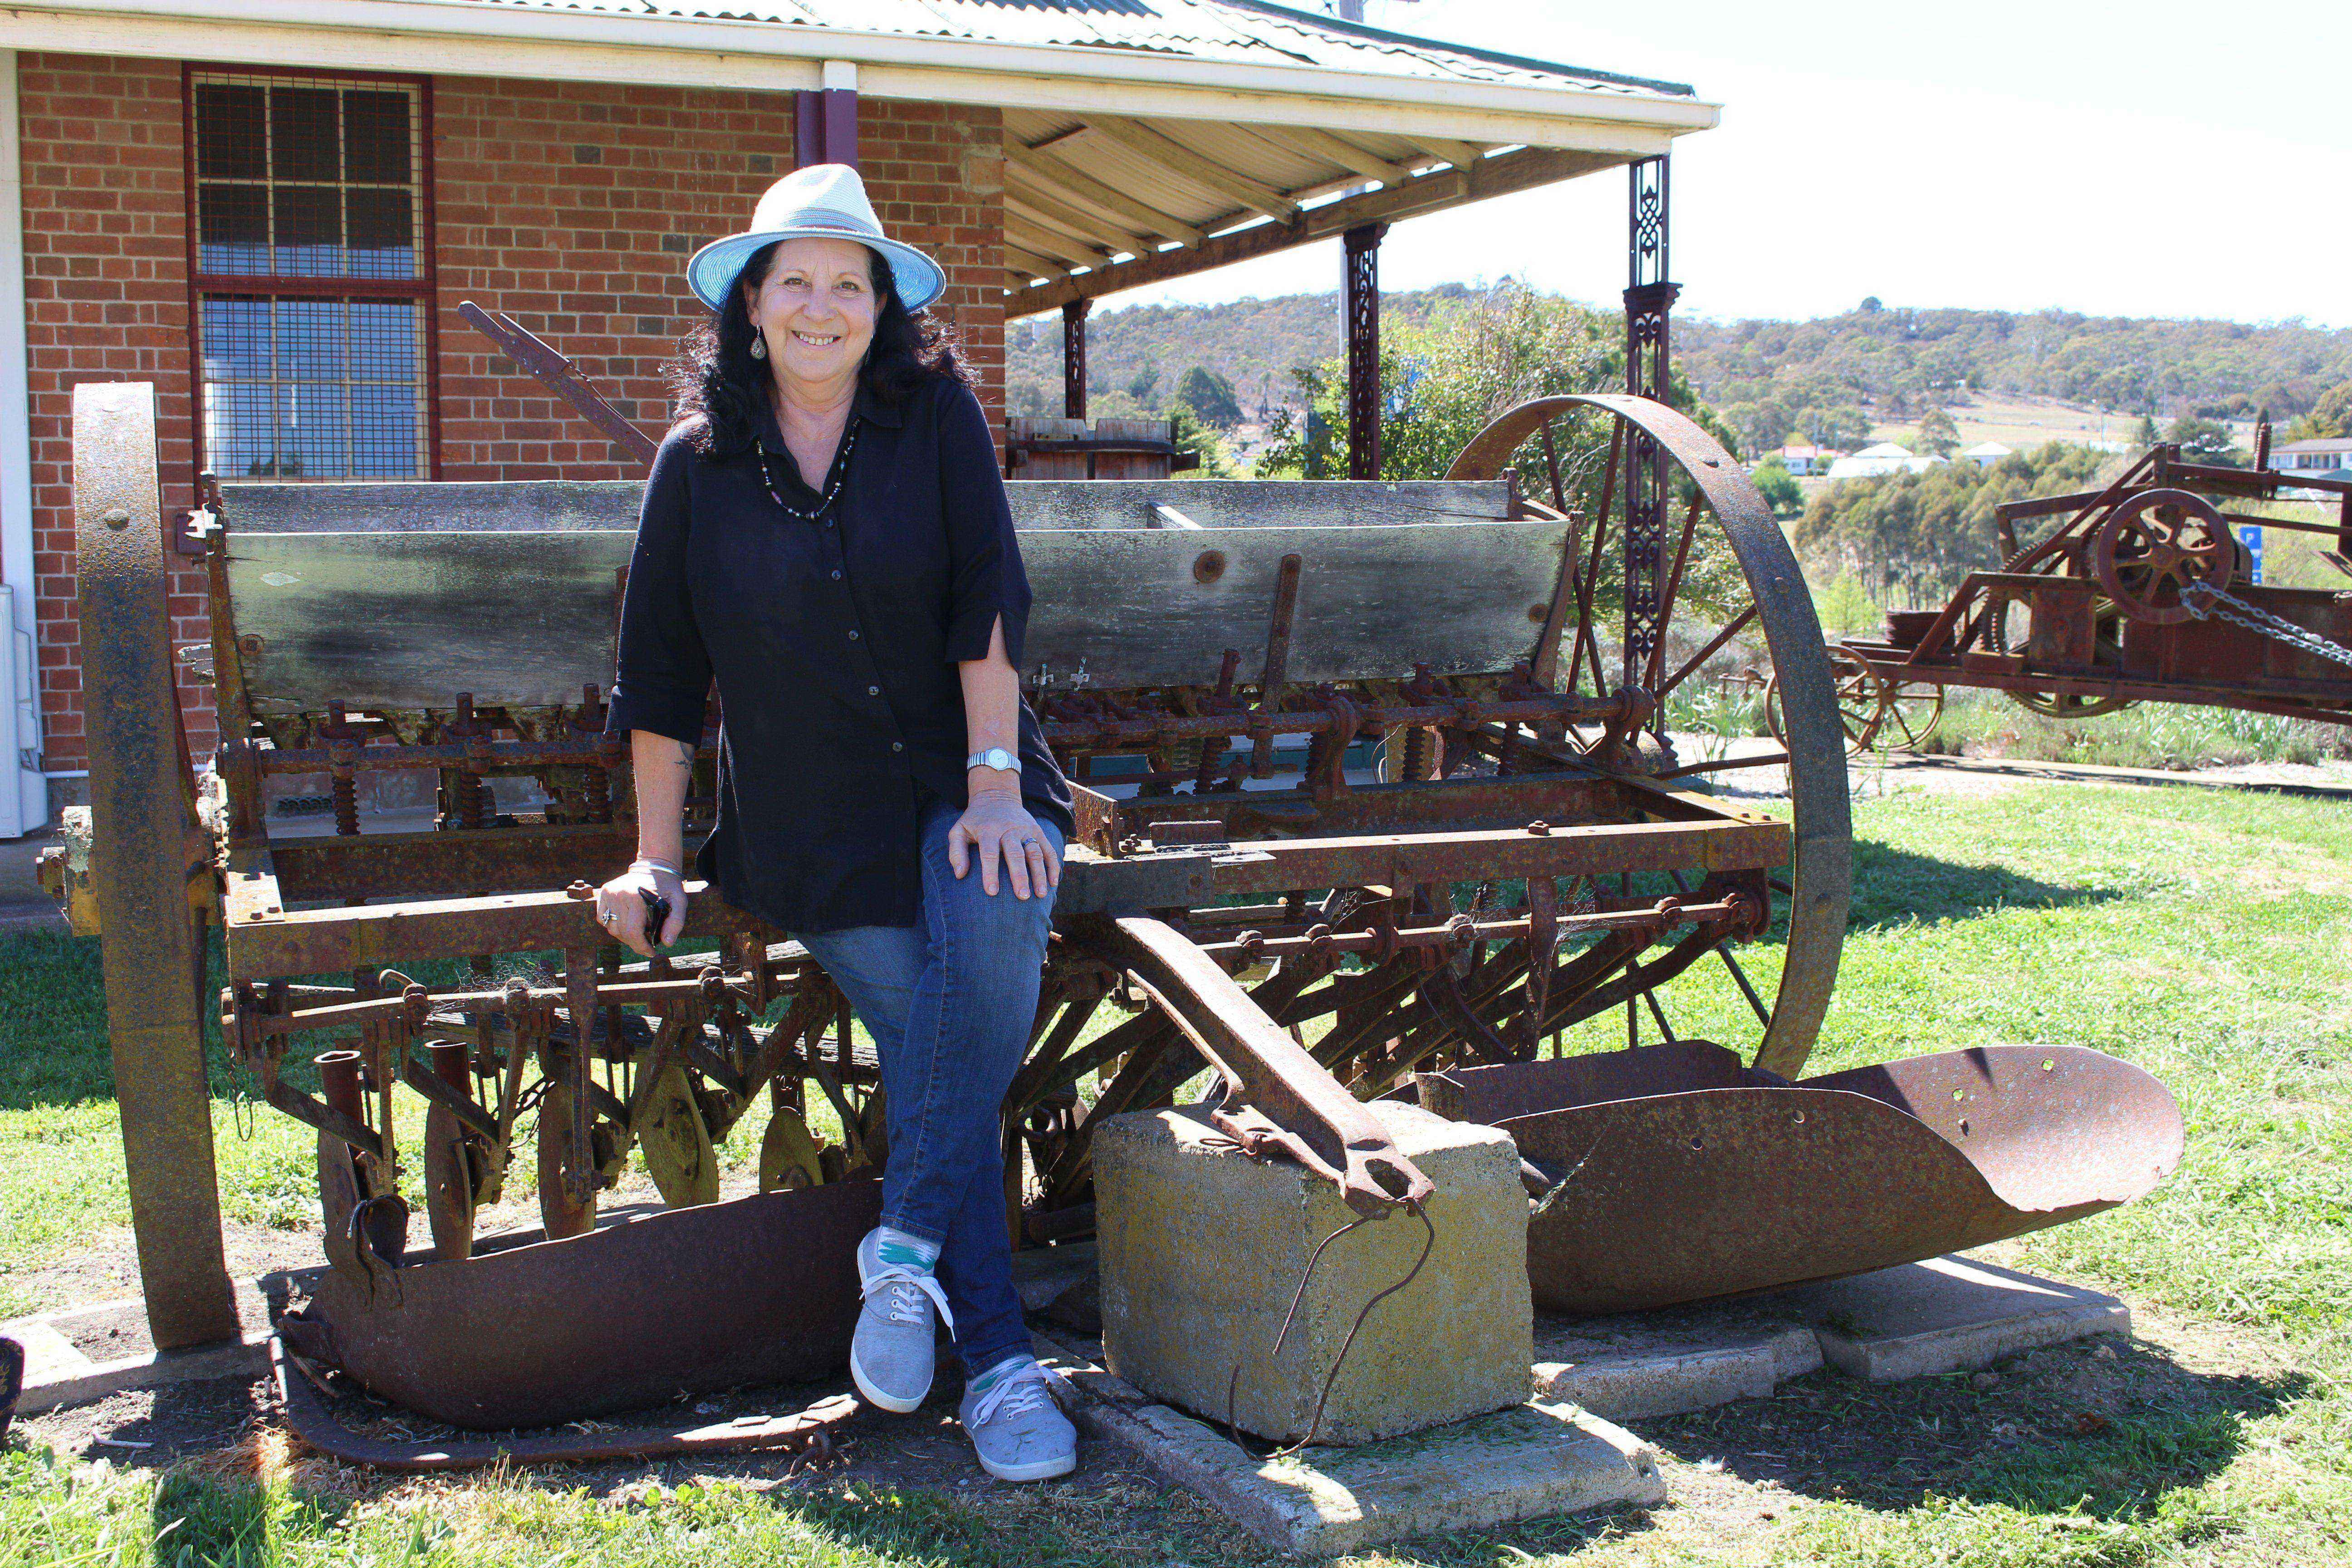 Learning the Bombala region's history is part of Sandy's new passion. Photo: Ian Campbell.